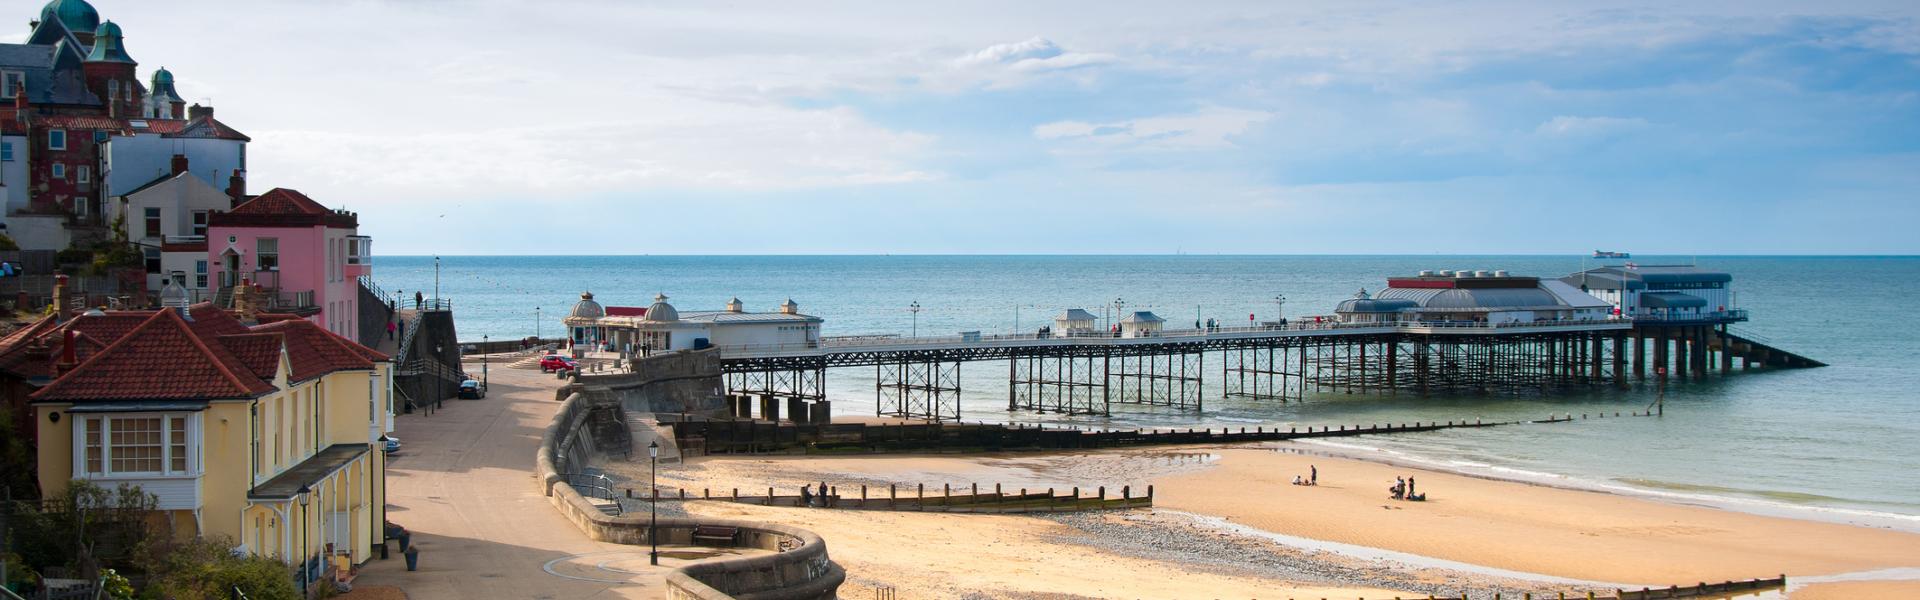 Holiday lettings & accommodation in Overstrand - HomeToGo